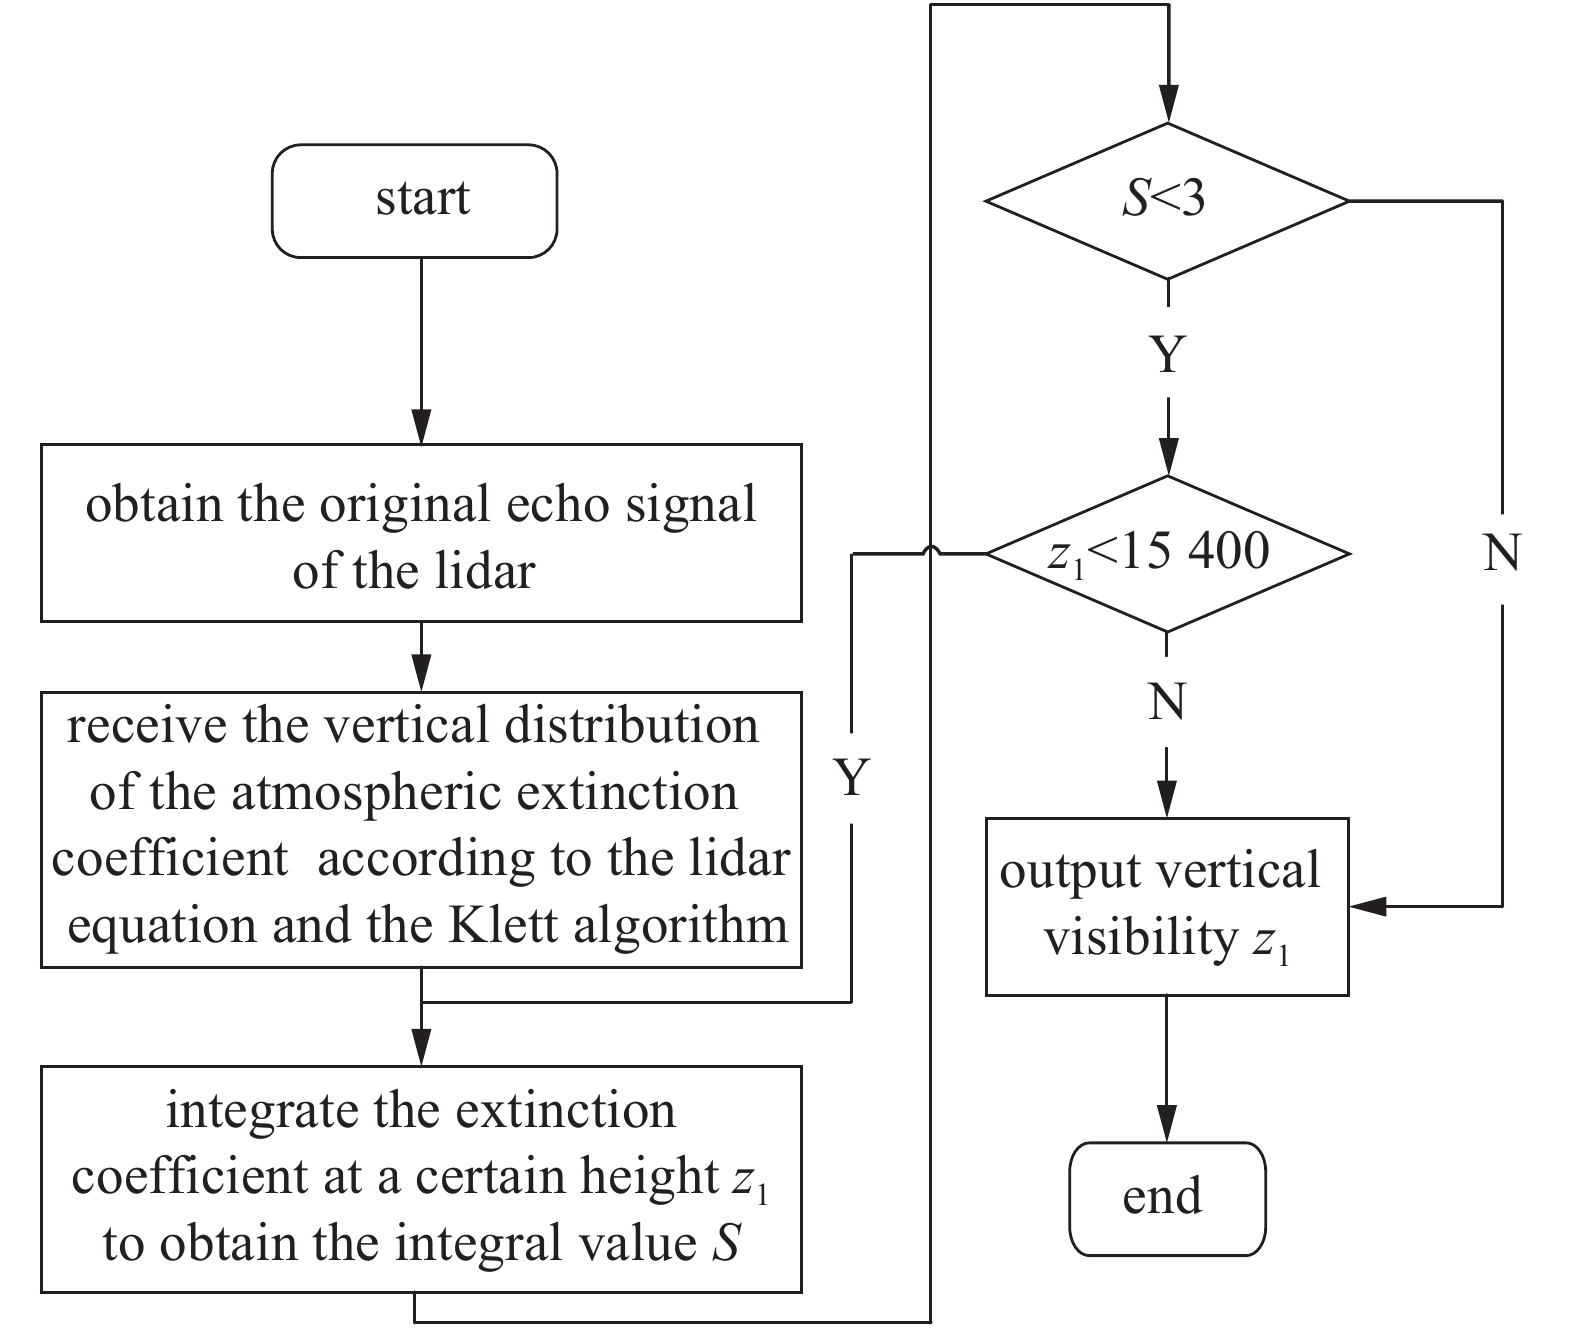 The inversion flow chart of vertical visibility